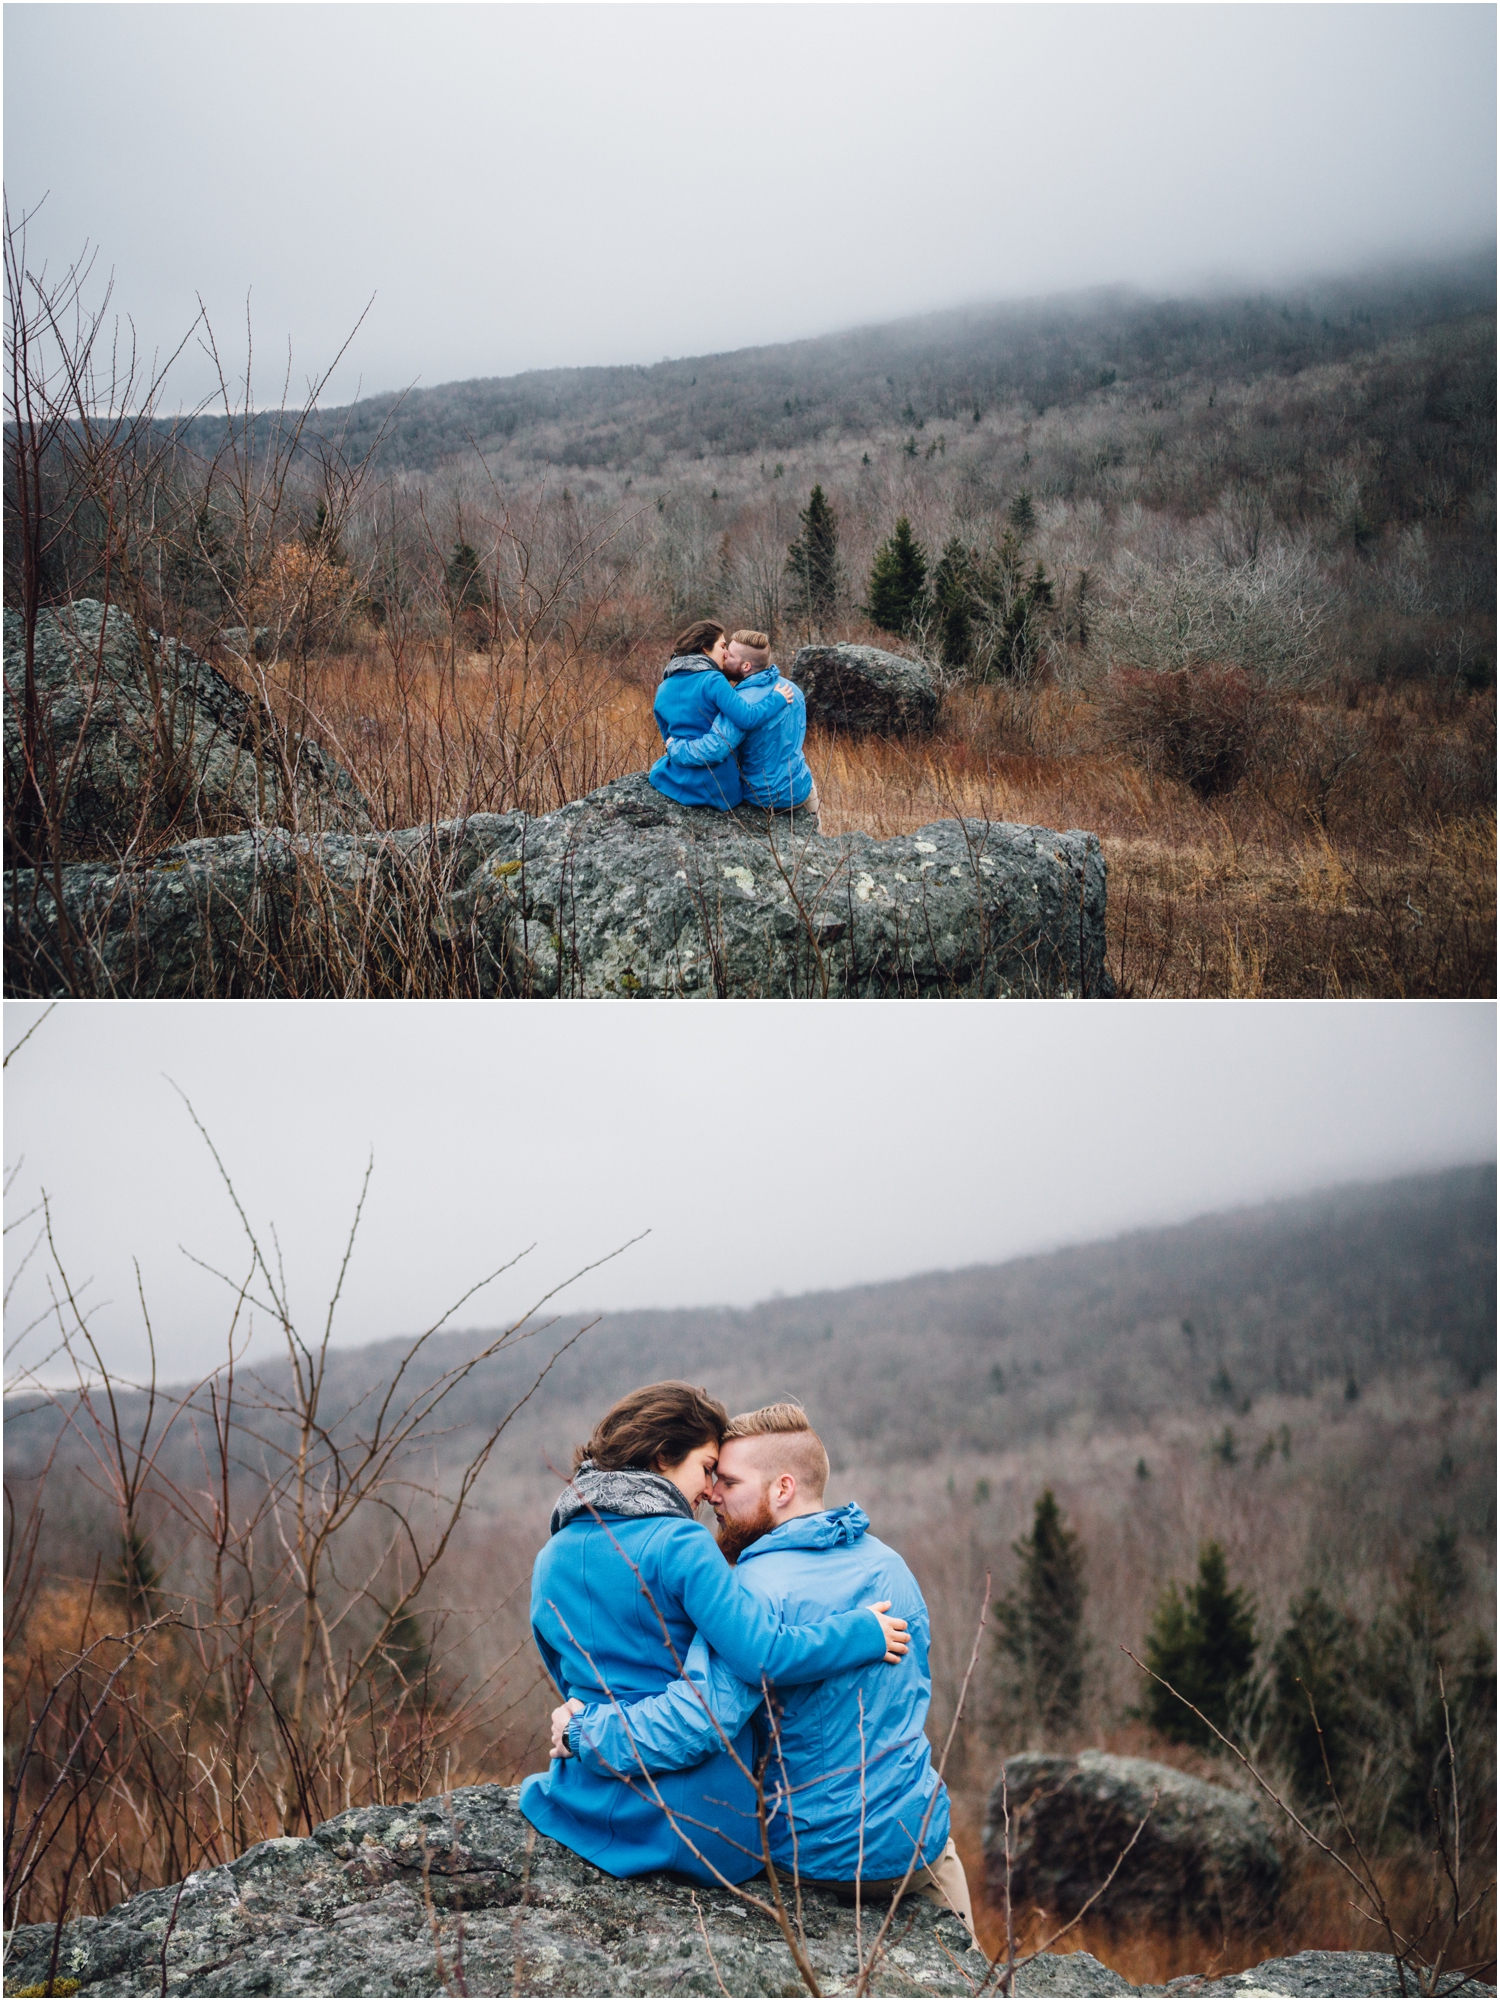 katy-sergent-photography-grayson-highlands-engagement-session-mouth-of-wilson-virginia-damascus-appalachian-trail-tennessee-wedding-elopement_0025.jpg